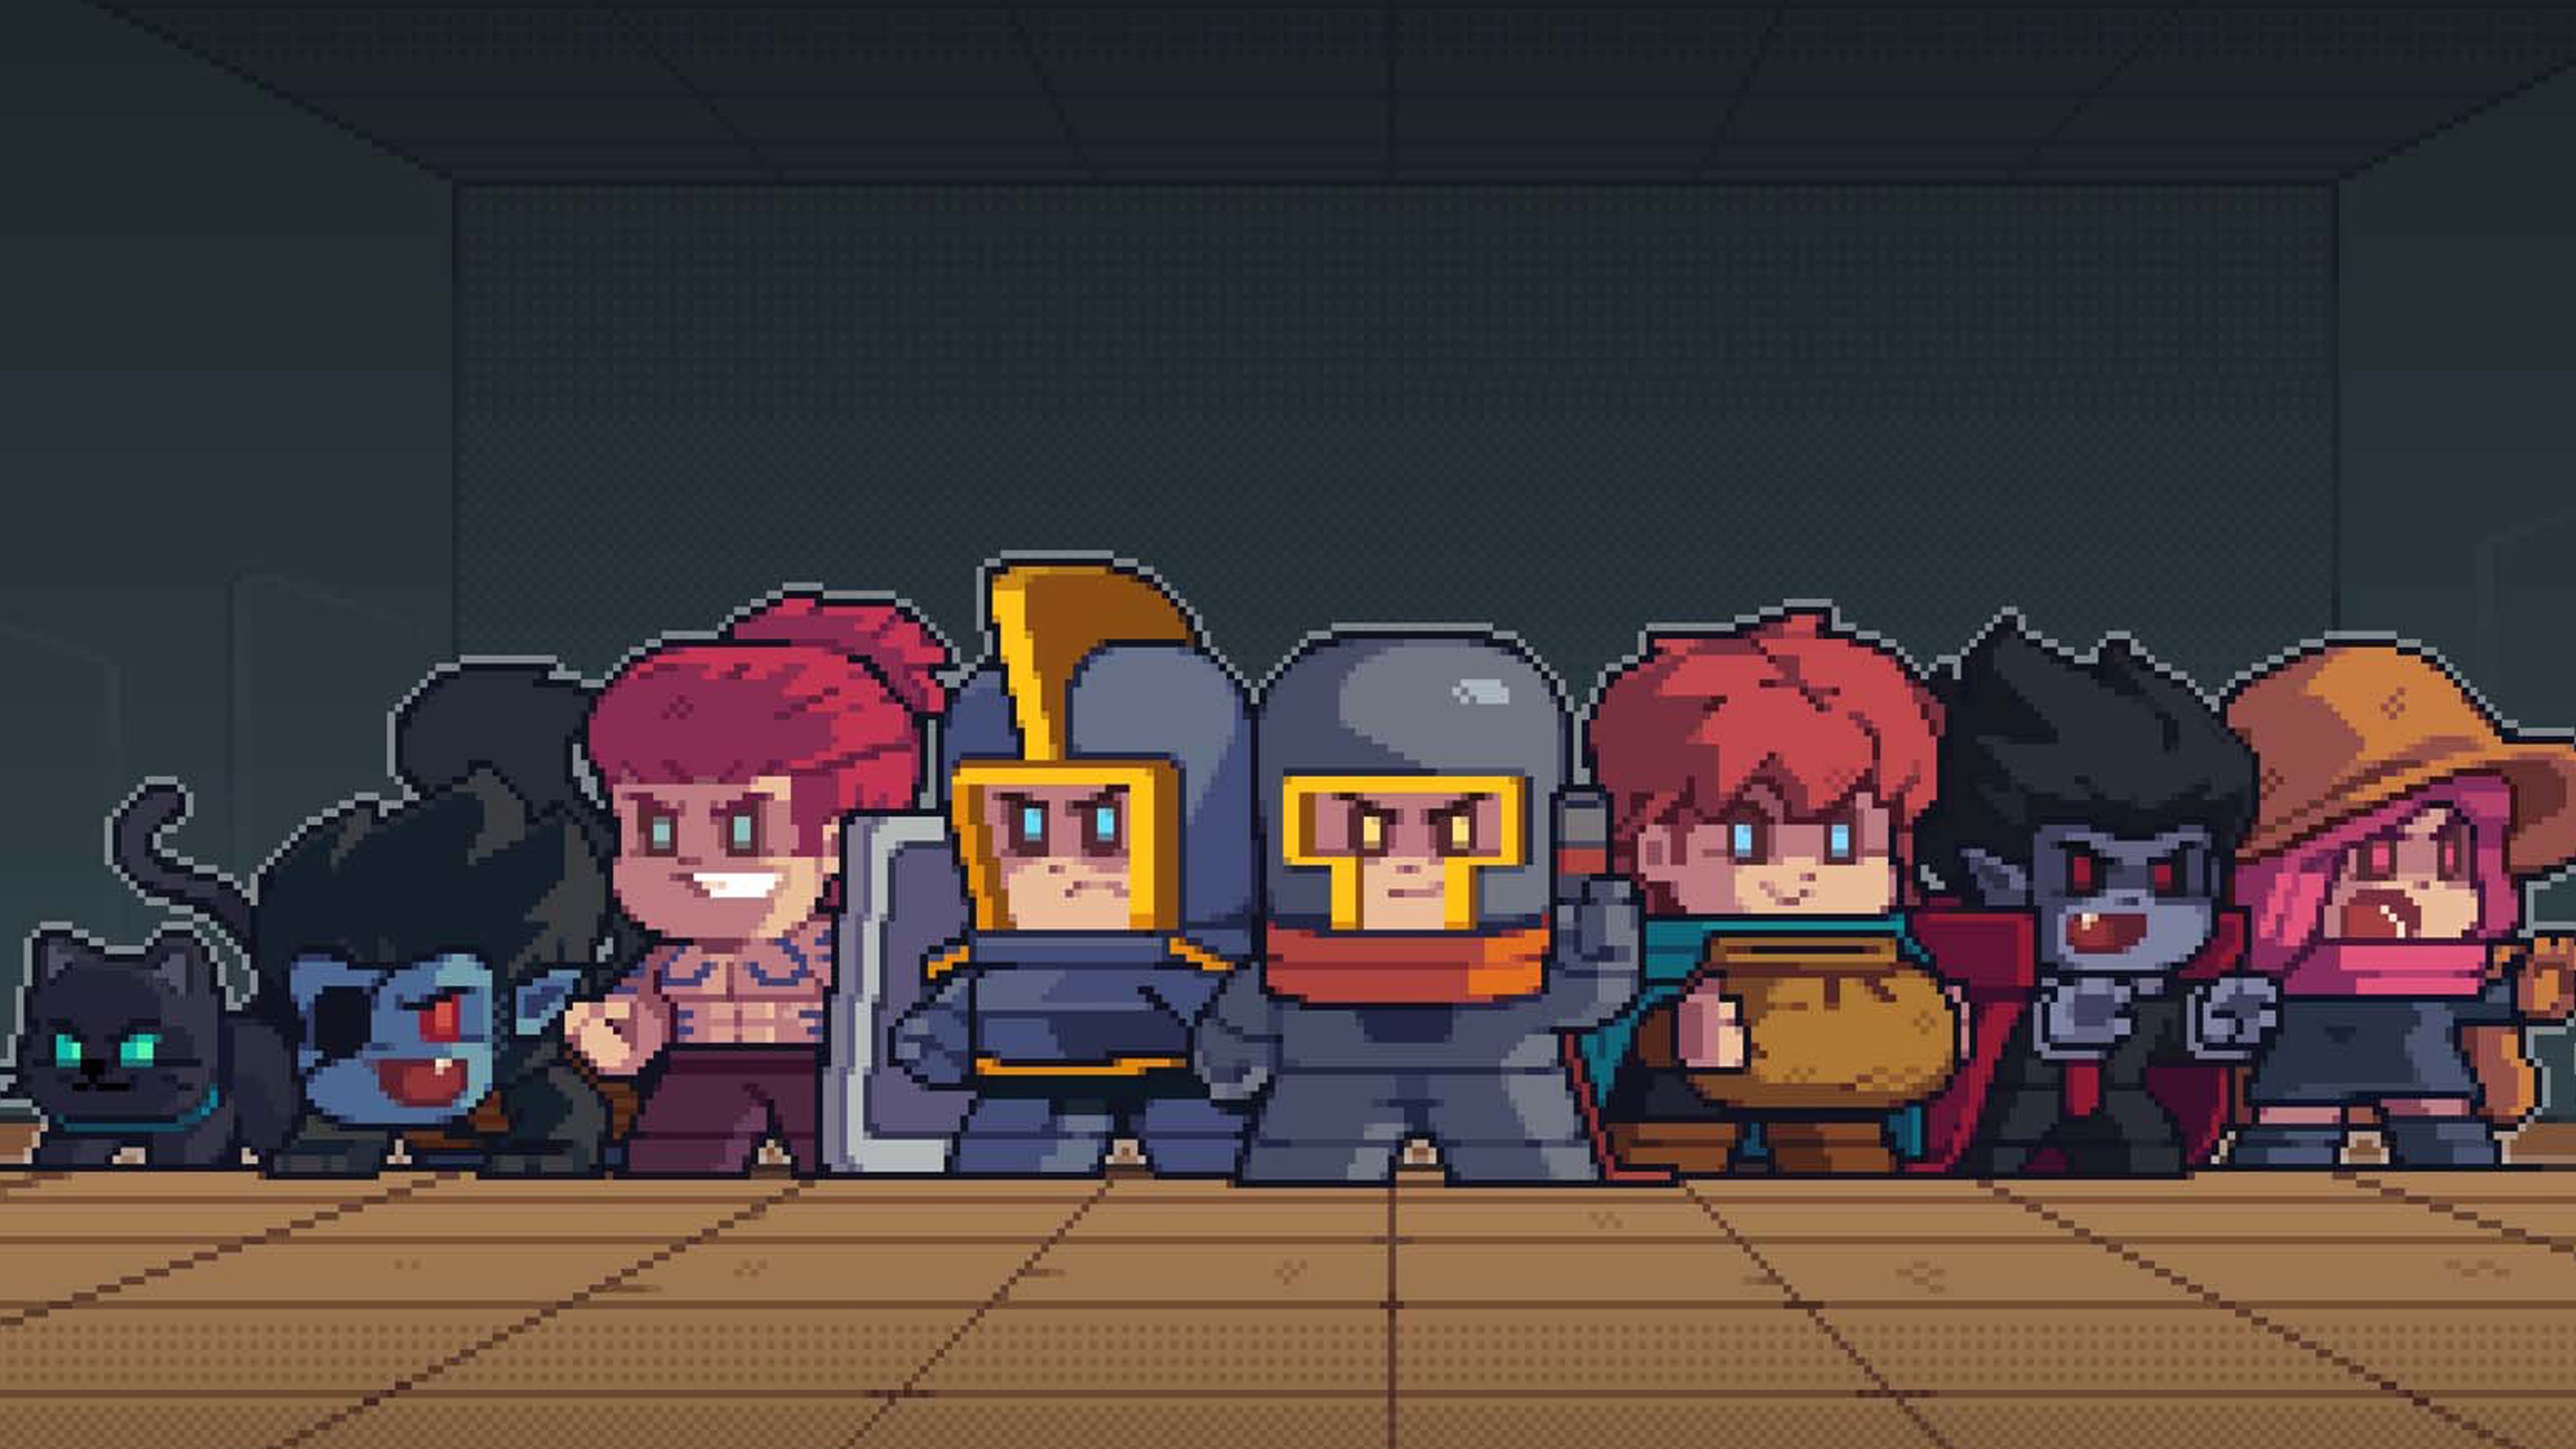 Pixelated artwork for mobile game Soul Knight showing an array of characters lined up and ready for battle.